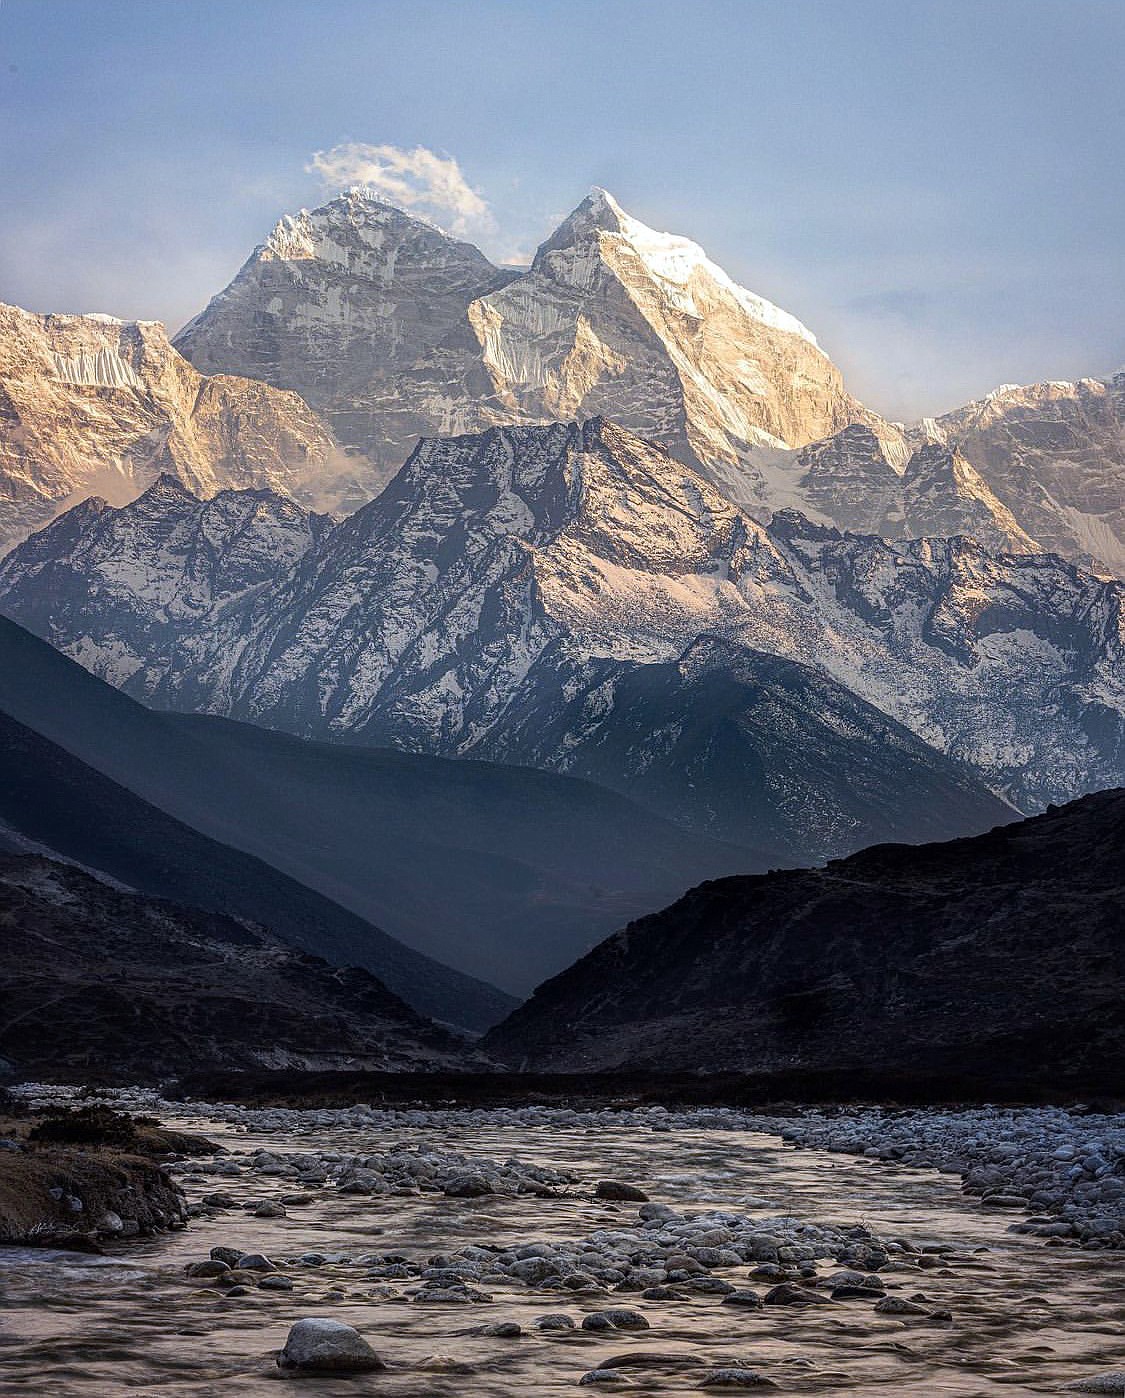 Sun sets on the Thame Khumbu Valley in Nepal on the path to Mt. Everest. (Photo courtesy of Steve Stevens)